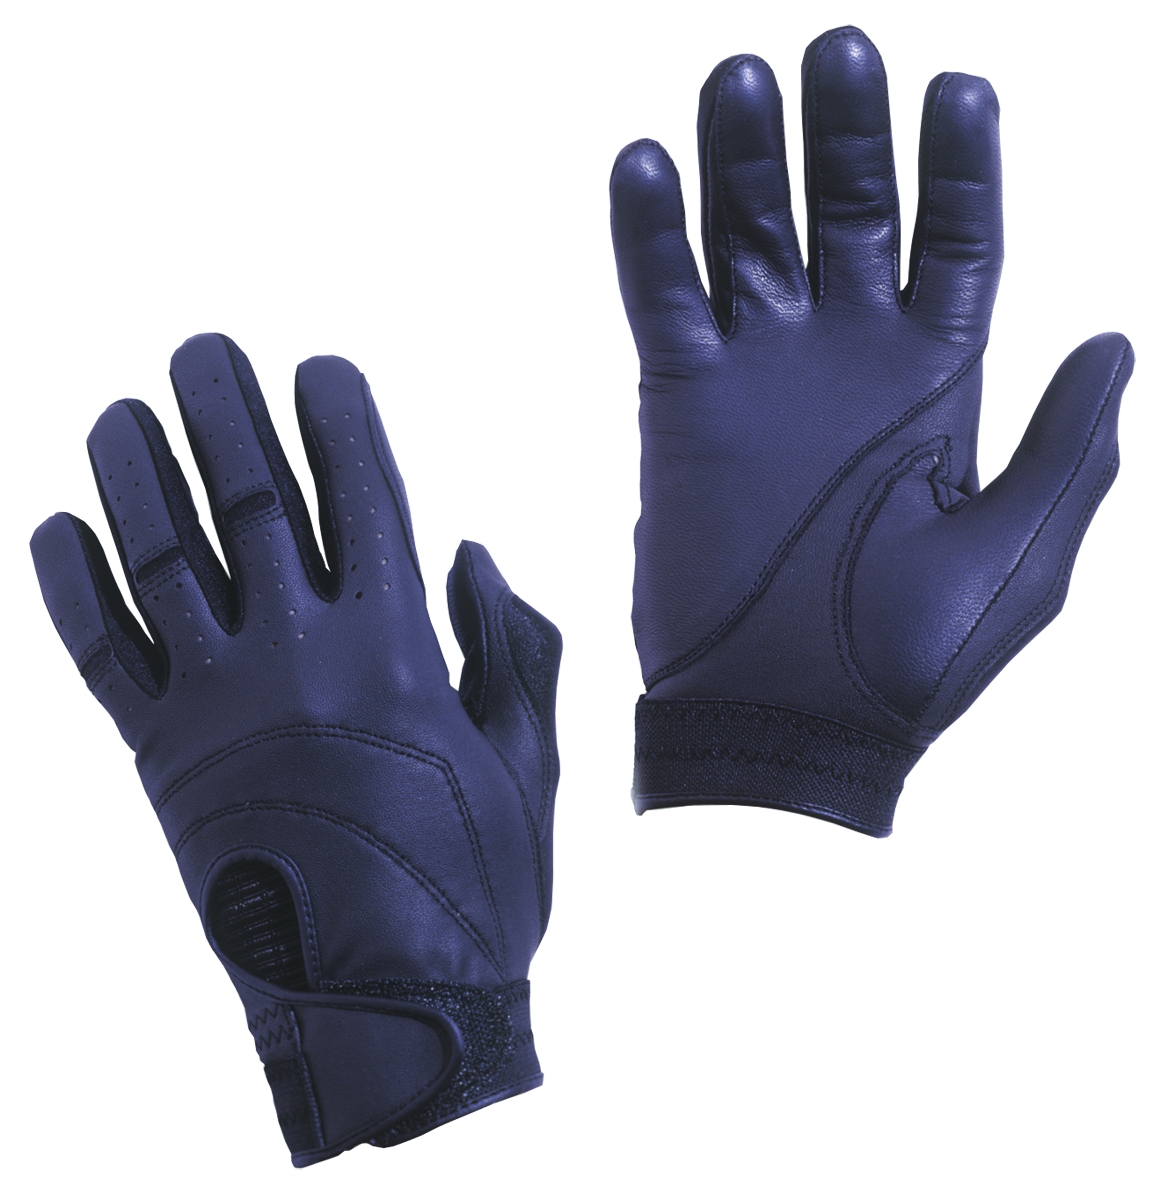 Deluxe Shooting Gloves - SSSF - Scholastic Shooting Sports Foundation